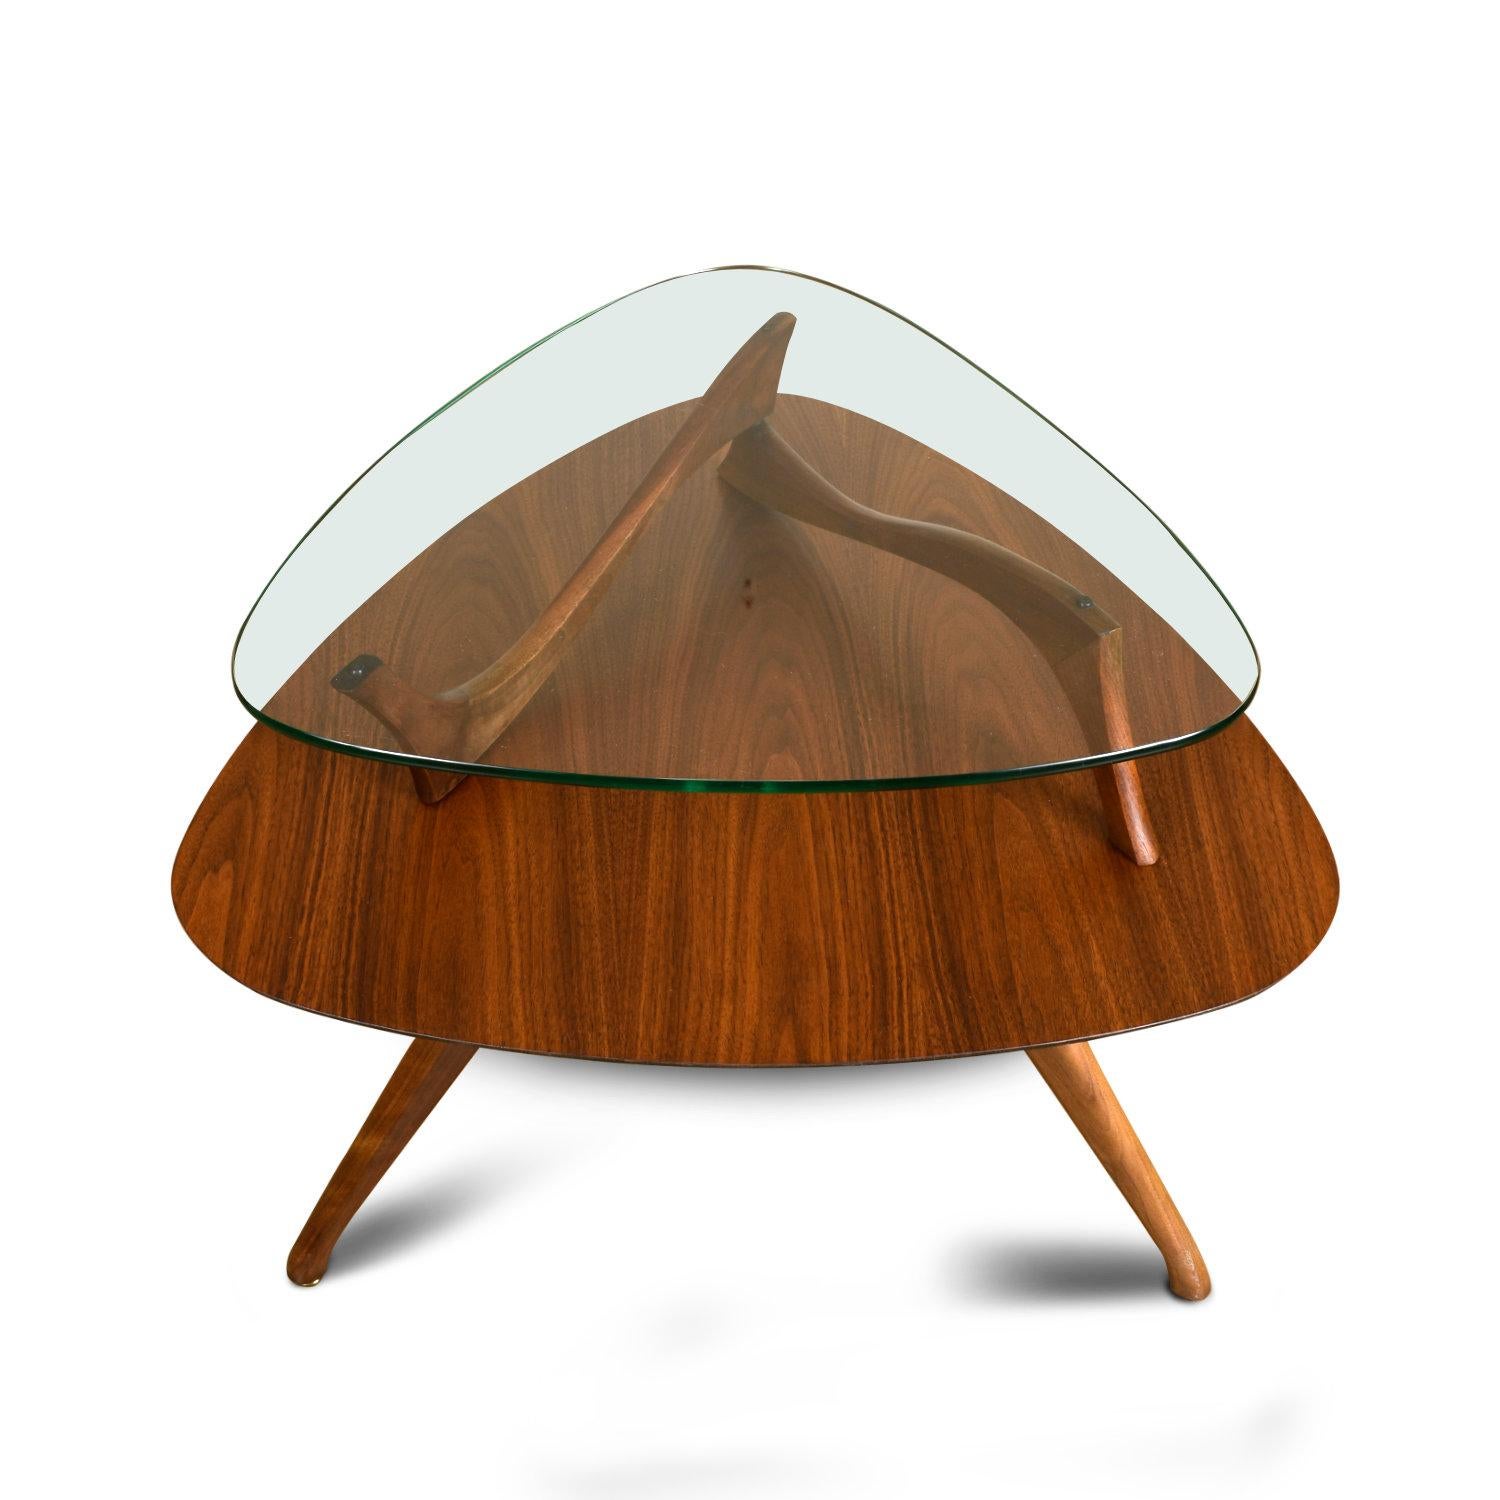 Outstanding triangular Mid-Century Modern side table. This guitar-pick shaped end table is exhibits absolutely exquisite styling and quality. Our restoration team fully disassembled this piece to refinish the walnut wood, breathing new life into